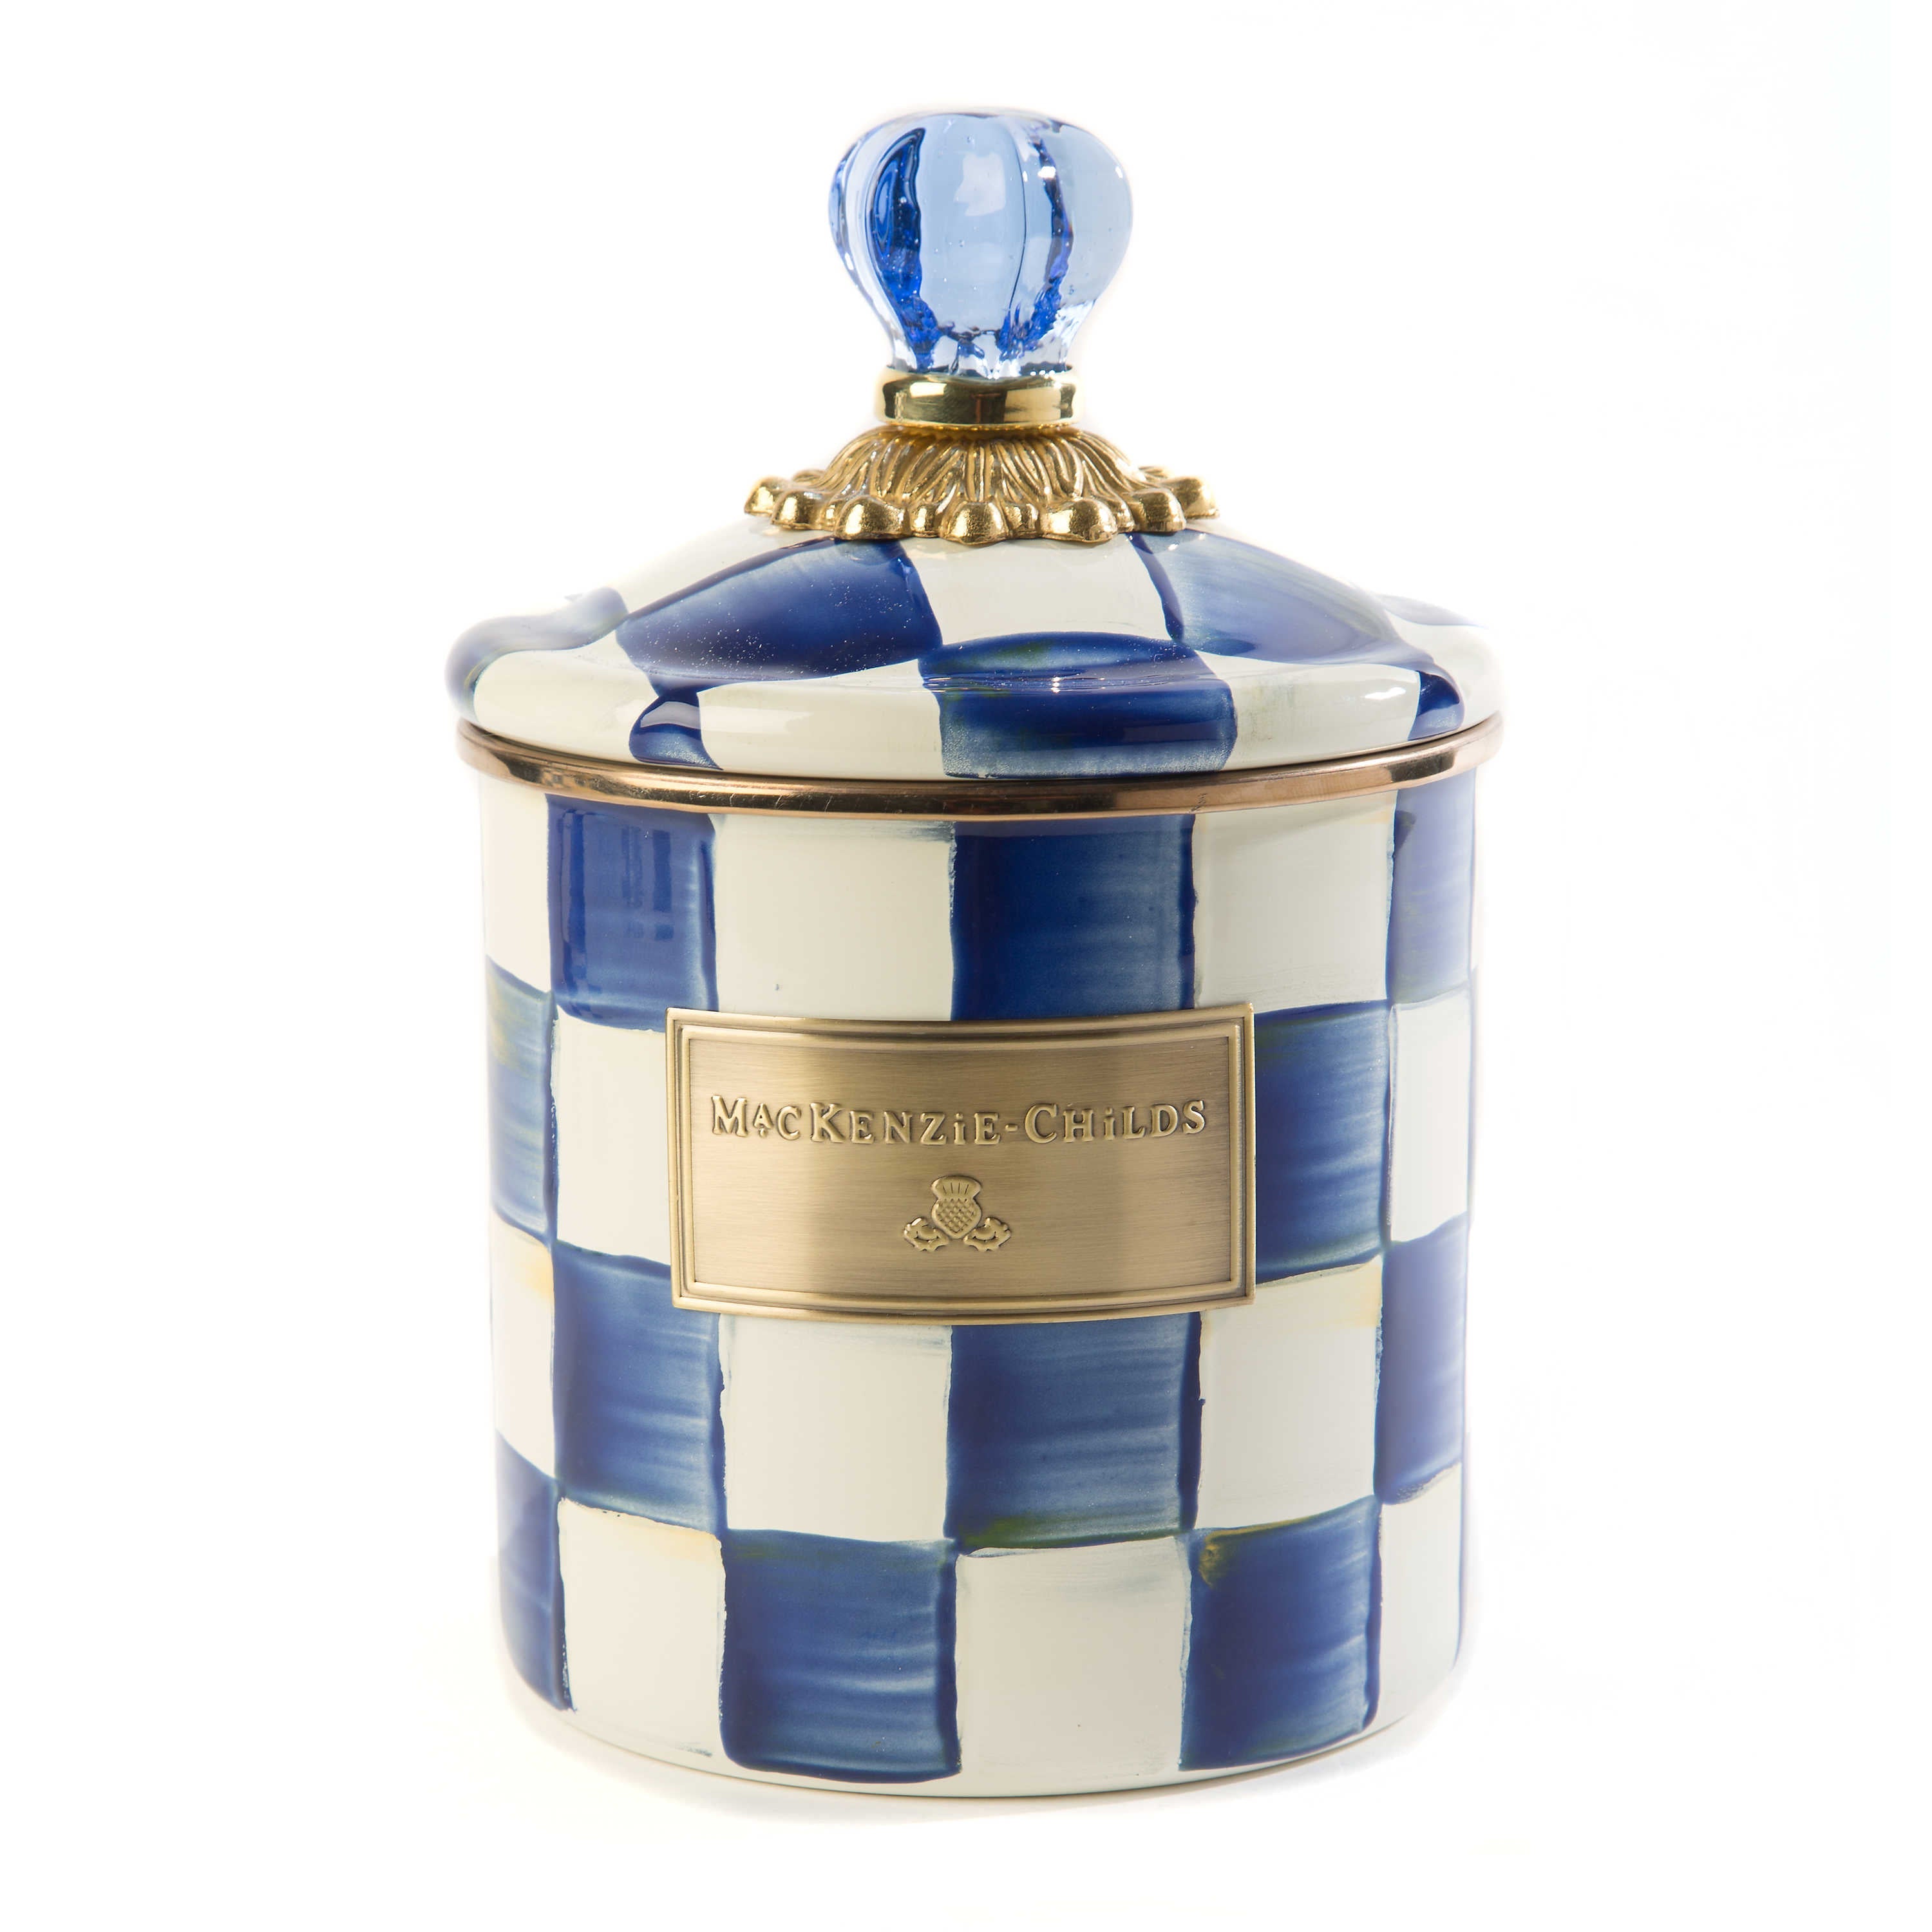 MacKenzie-Childs Royal Canister